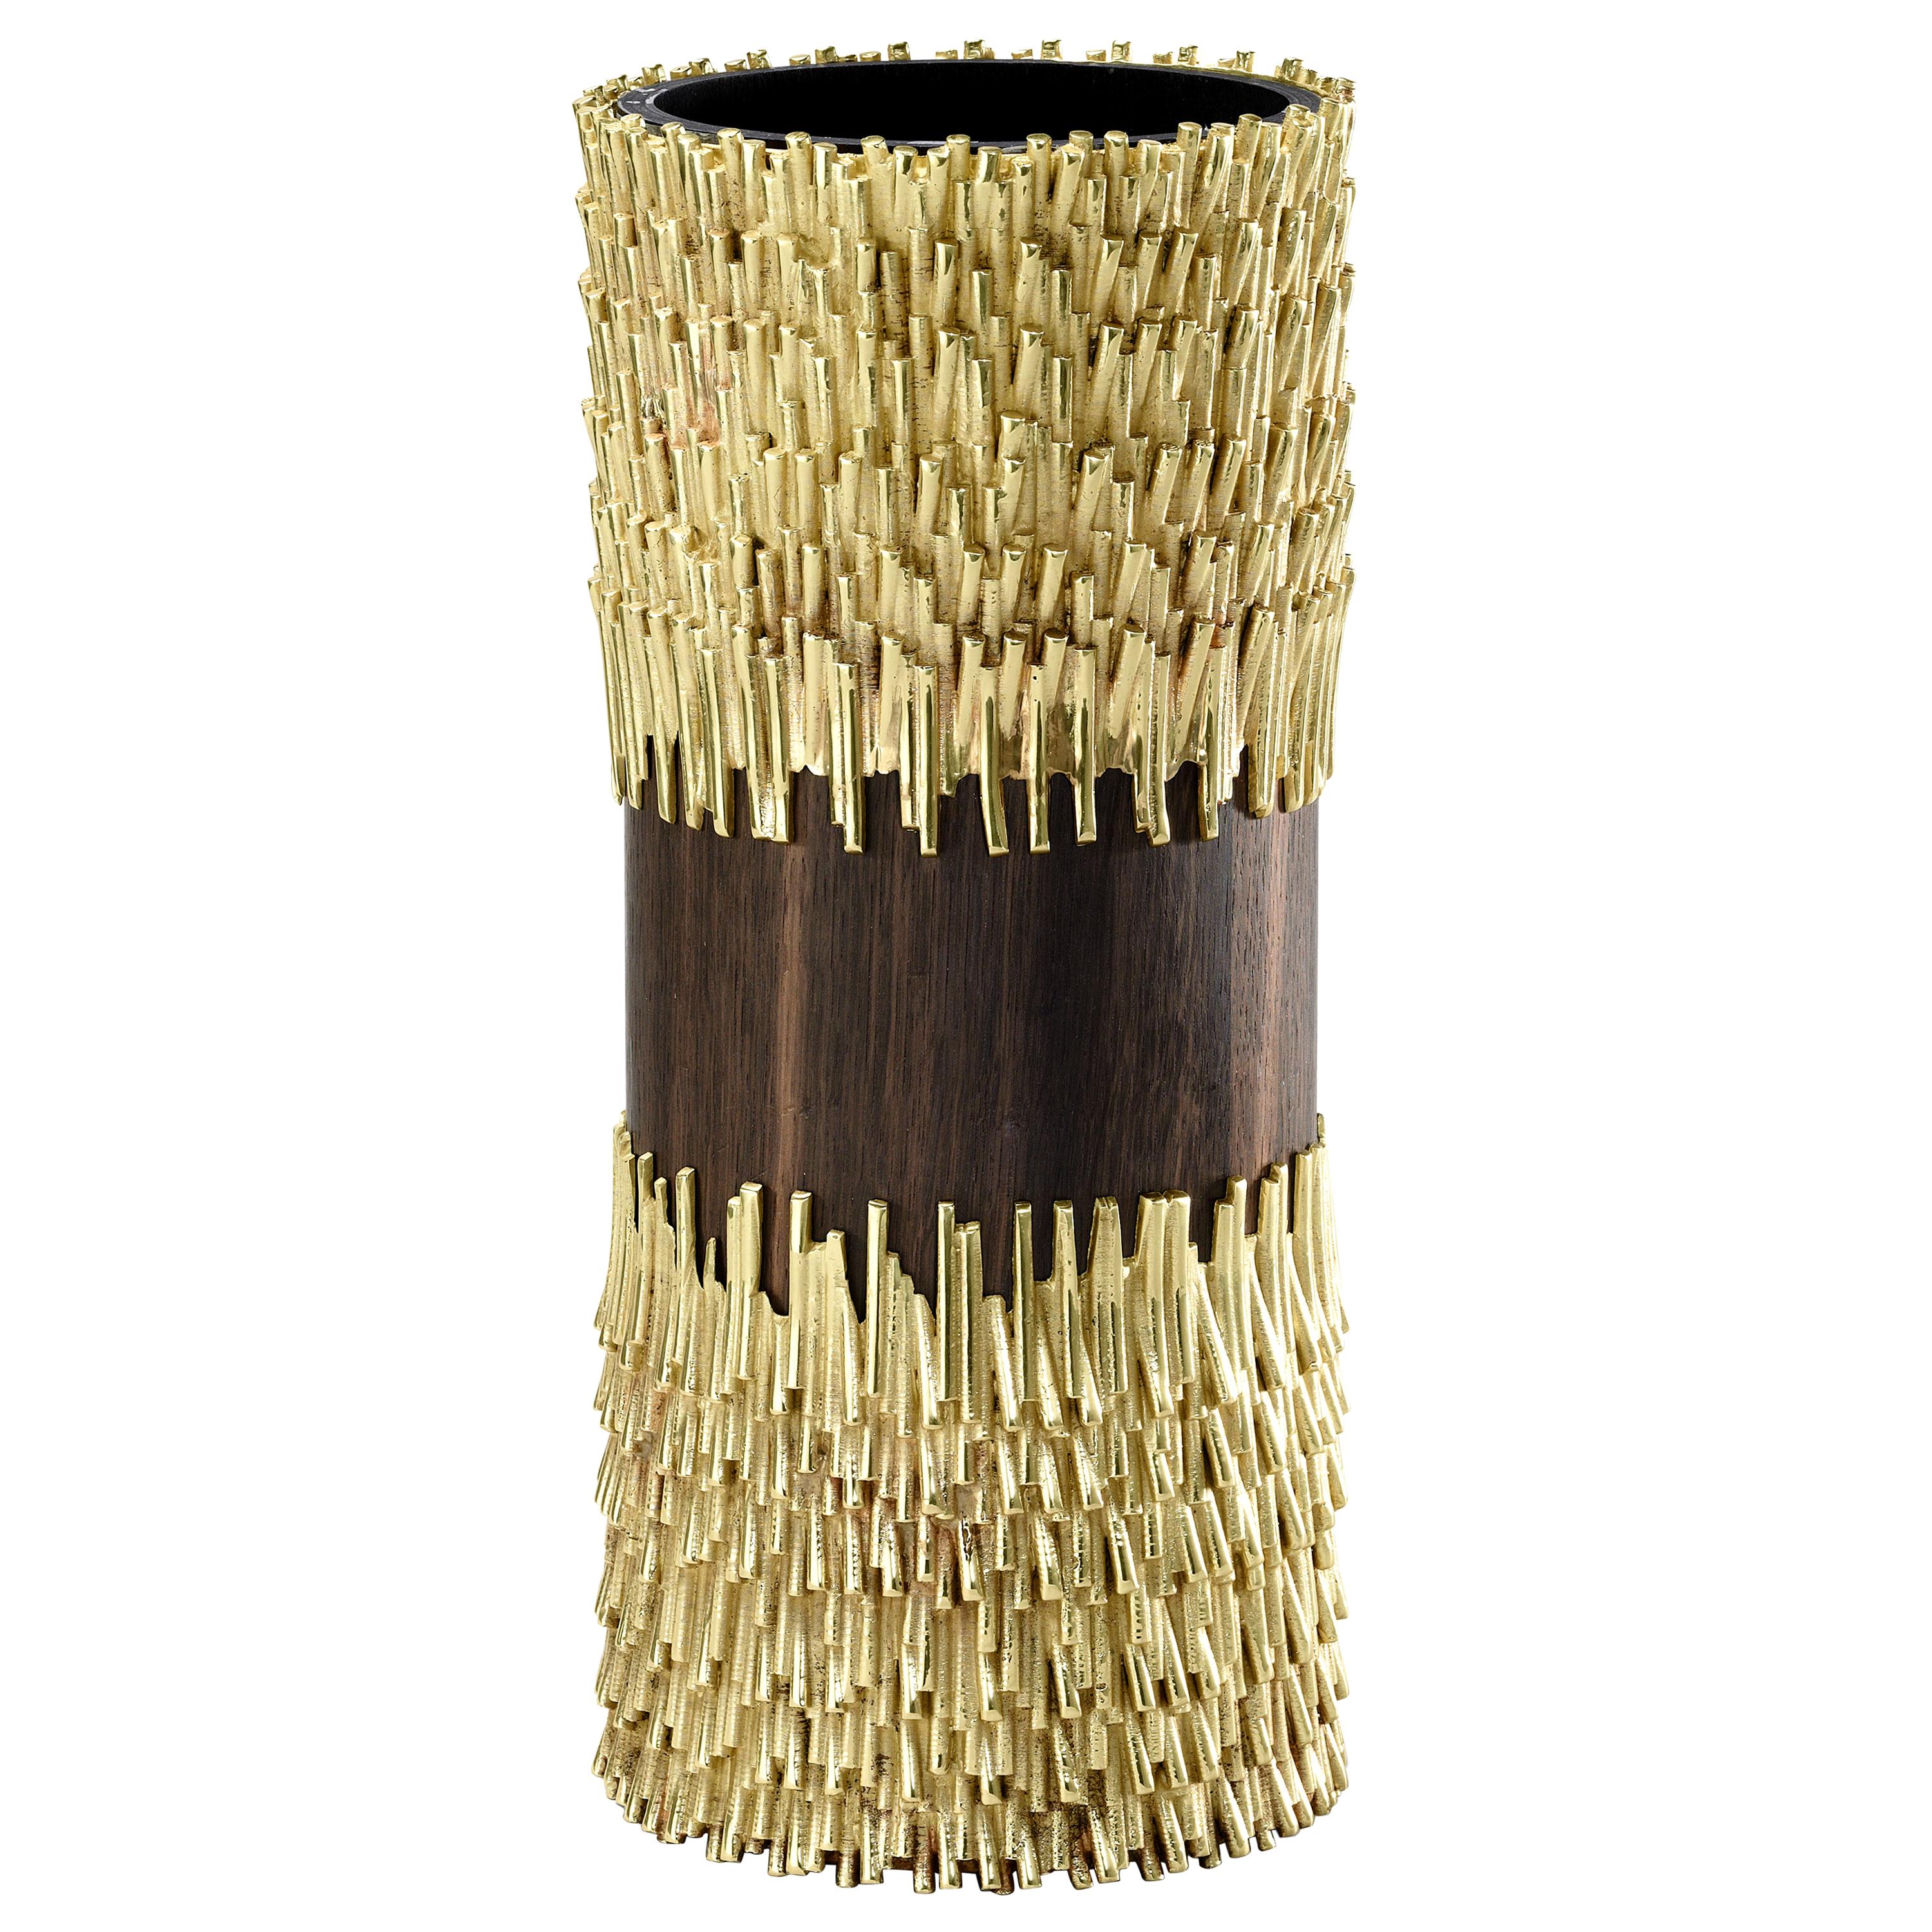 Jack Fruit Sculptural Vase in Polished Brass and Wood by Campana Brothers For Sale